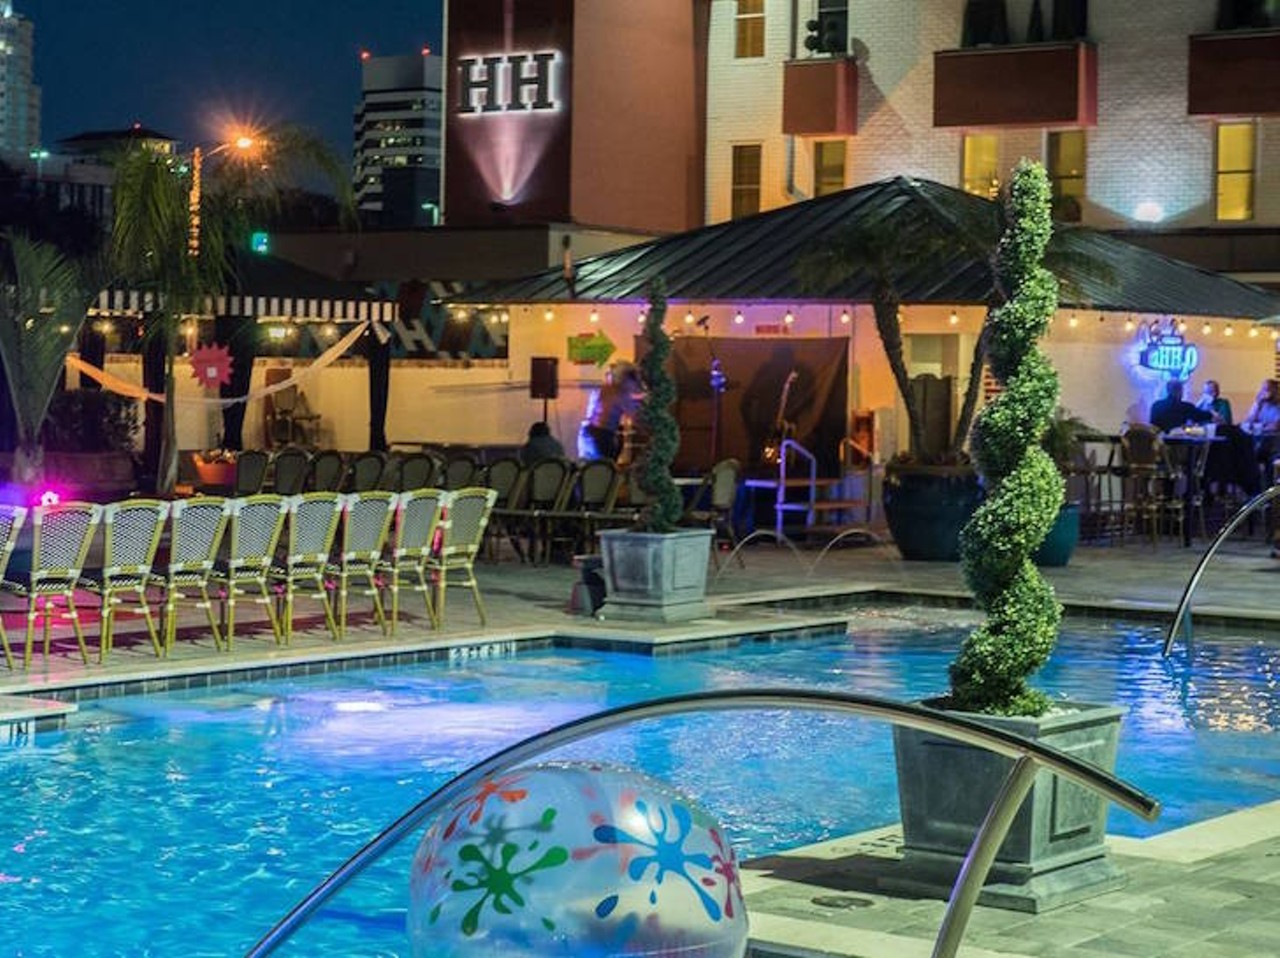 Hollander Hotel 
421 4th Ave N, St. Petersburg, FL 33701, (727) 873-7900
Price: free; requires cabana reservation  
In the heart of downtown St. Pete, Hollander Hotel has the best weekend pool parties around, with party themes changing every week. It&#146;s a fun (and much less expensive way) to experience their beautiful pool and poolside bar. 
Photo via Hollander Hotel/Facebook